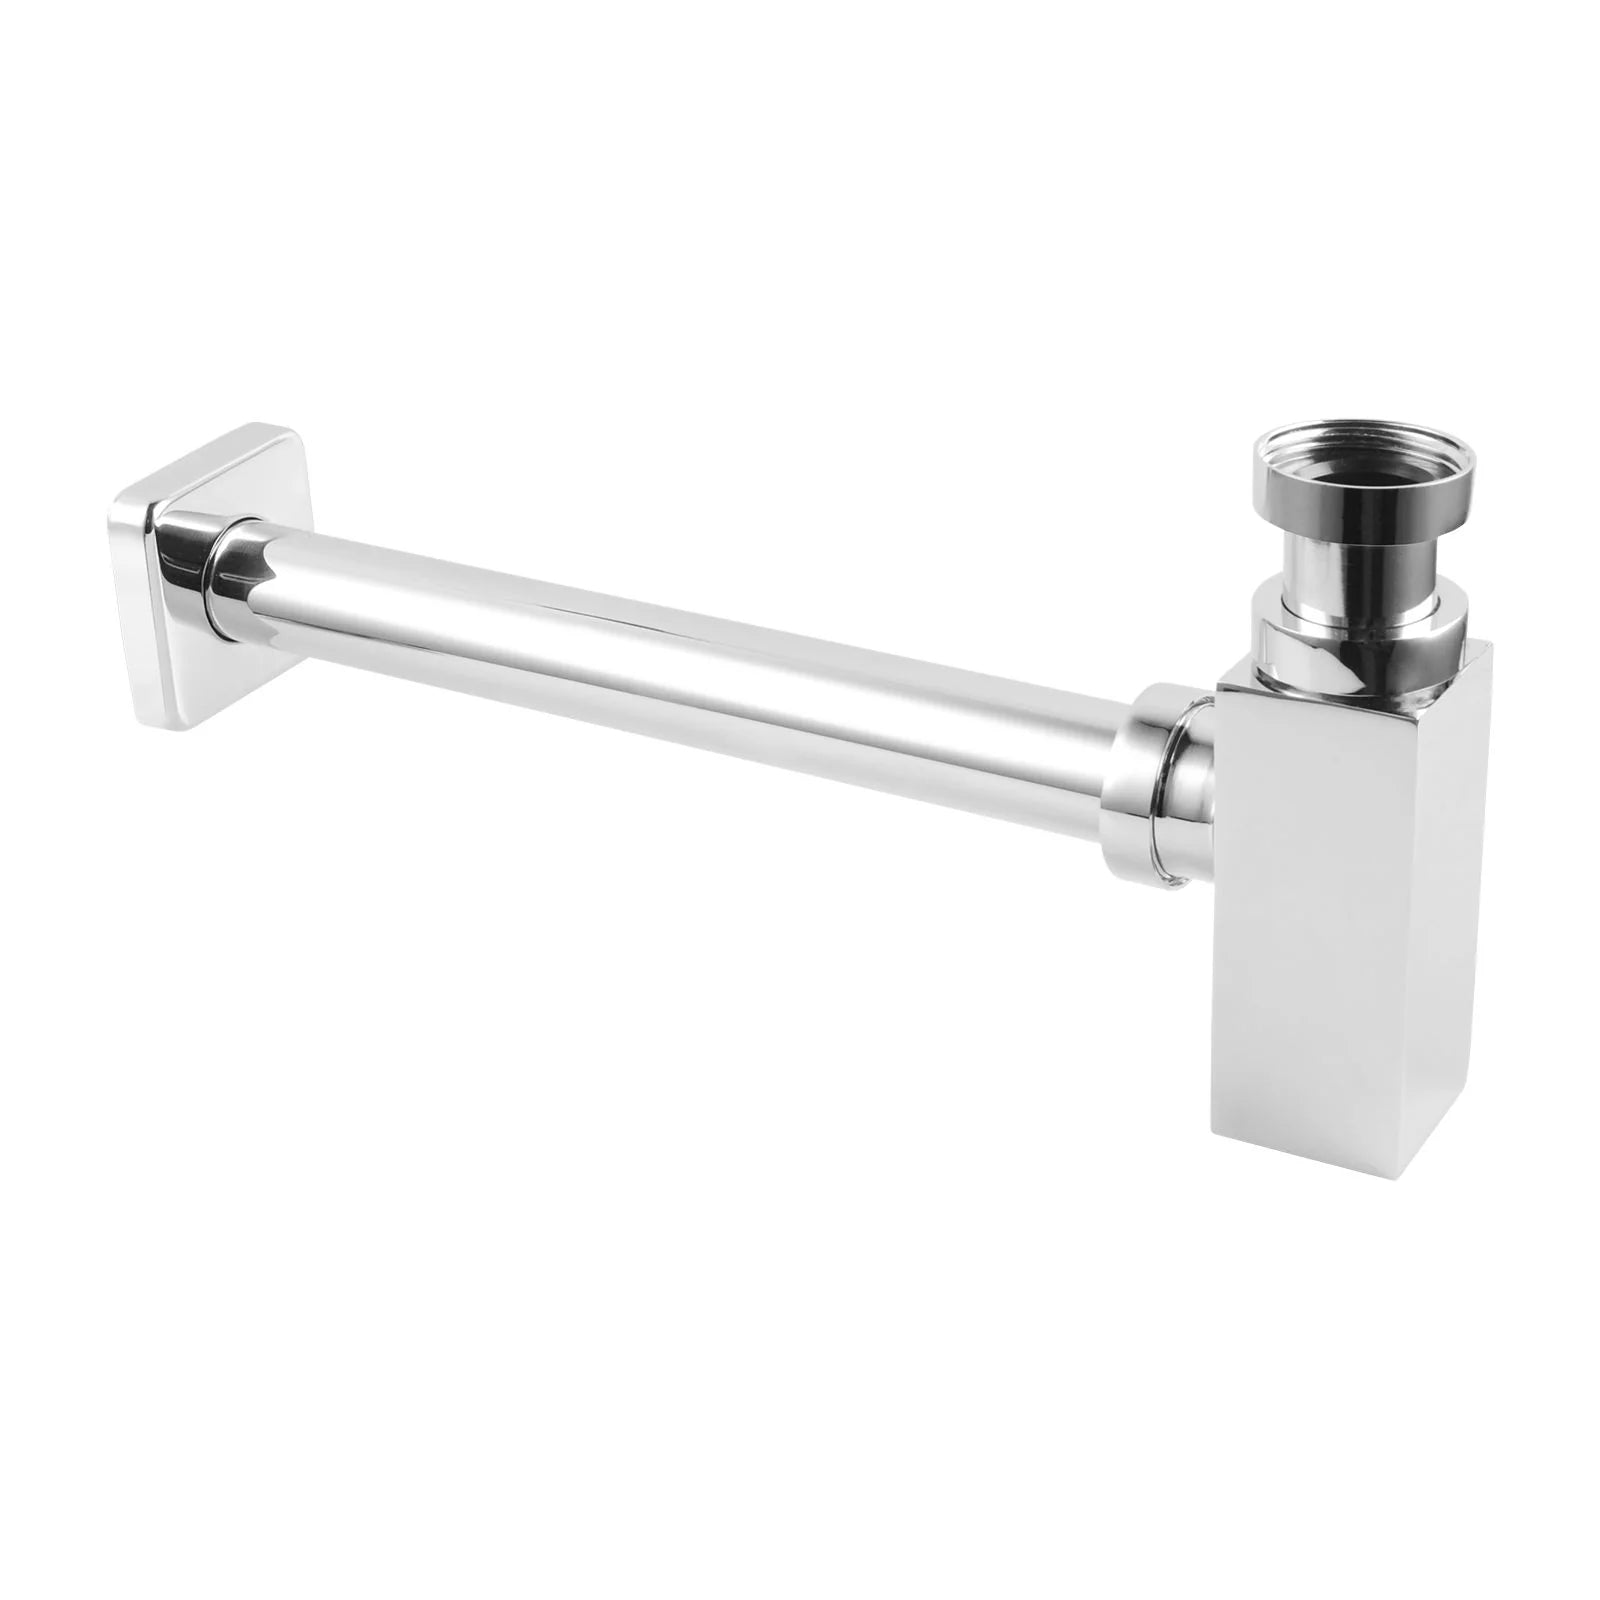 Basin Bottle Trap 32mm: Plumbing Essential for Sink Drainage-Chrome-CH001.BT